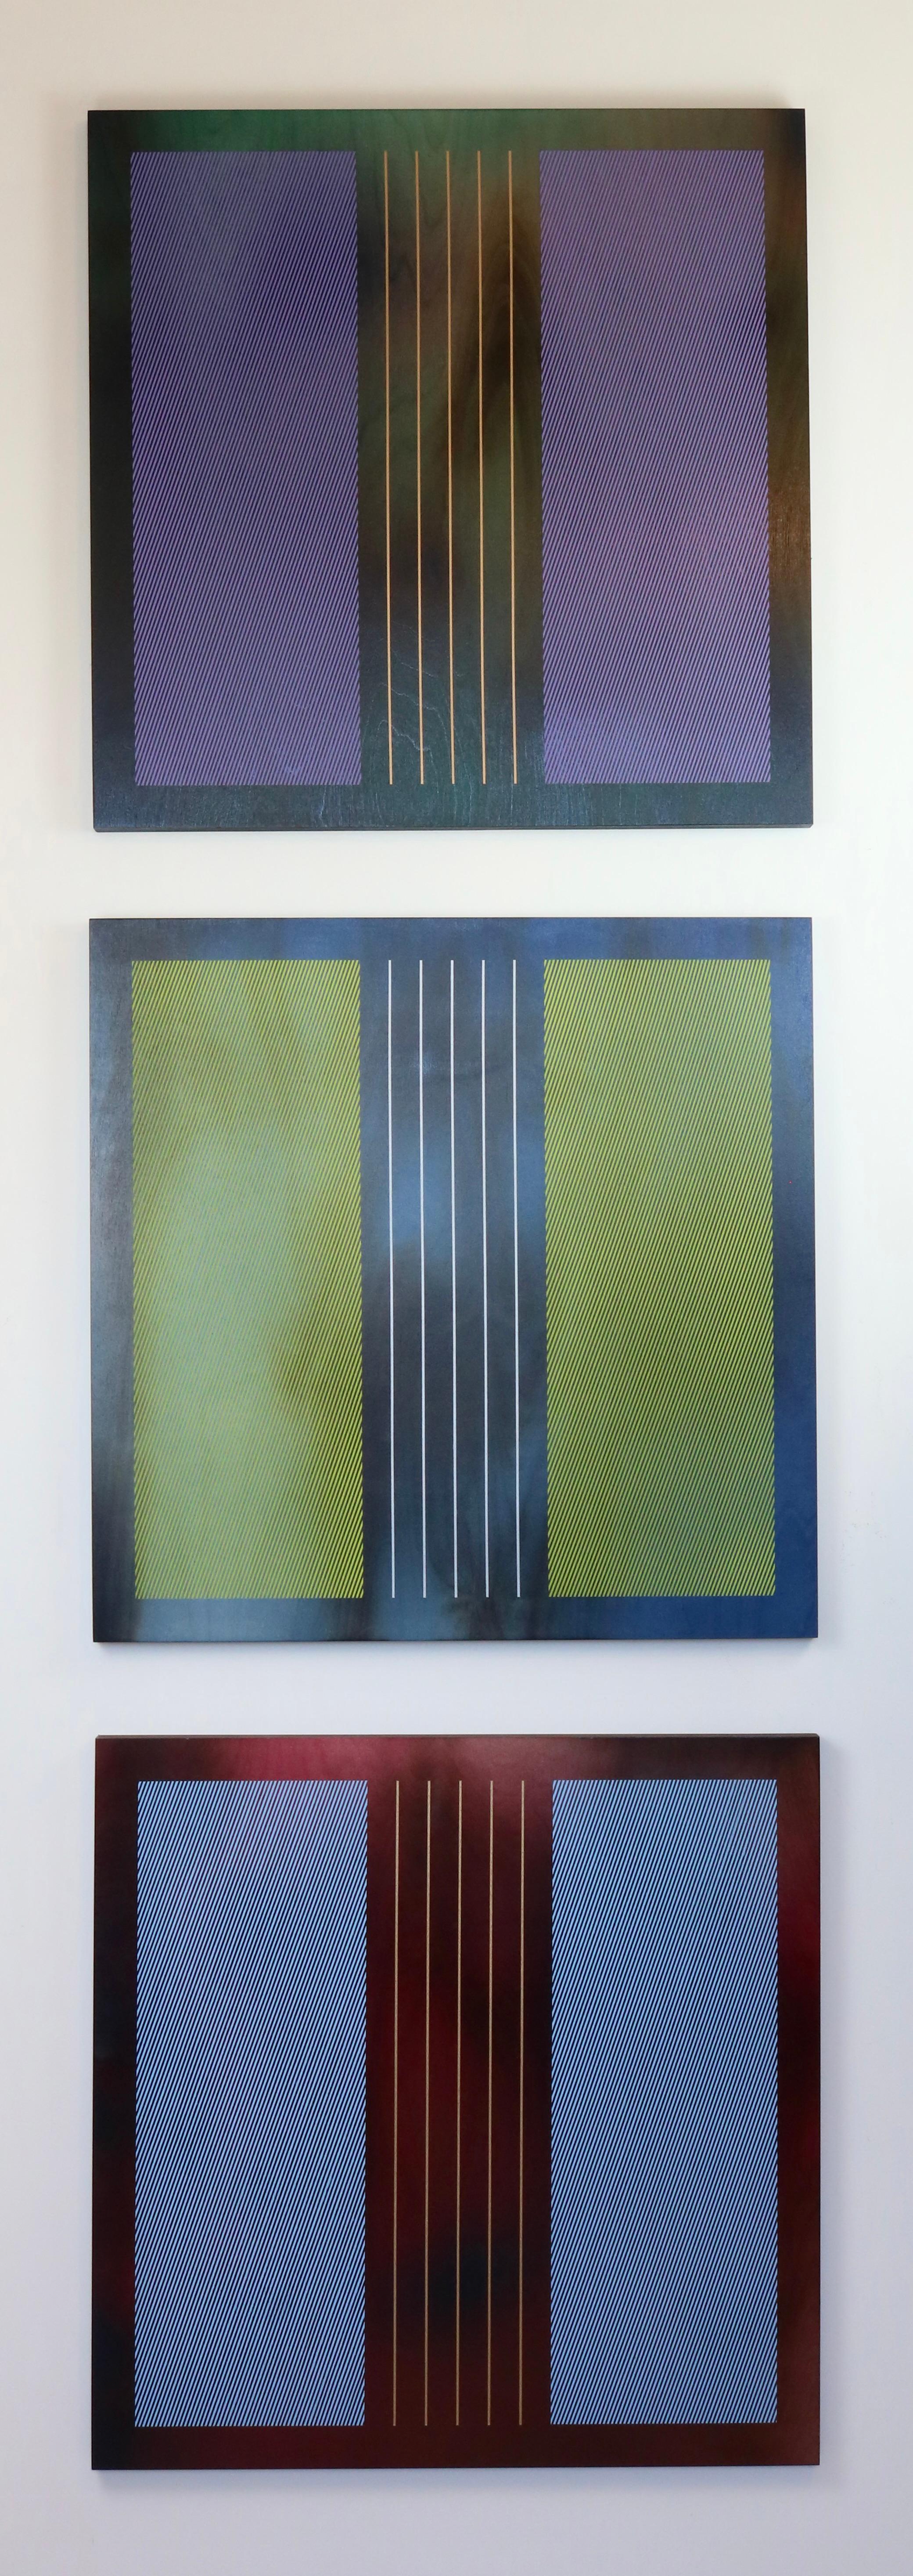 Melisa Taylor Metzger Abstract Painting - 3 Mangatas tryptic panels as column (or row) (tryptic, squares, minimal, grid)